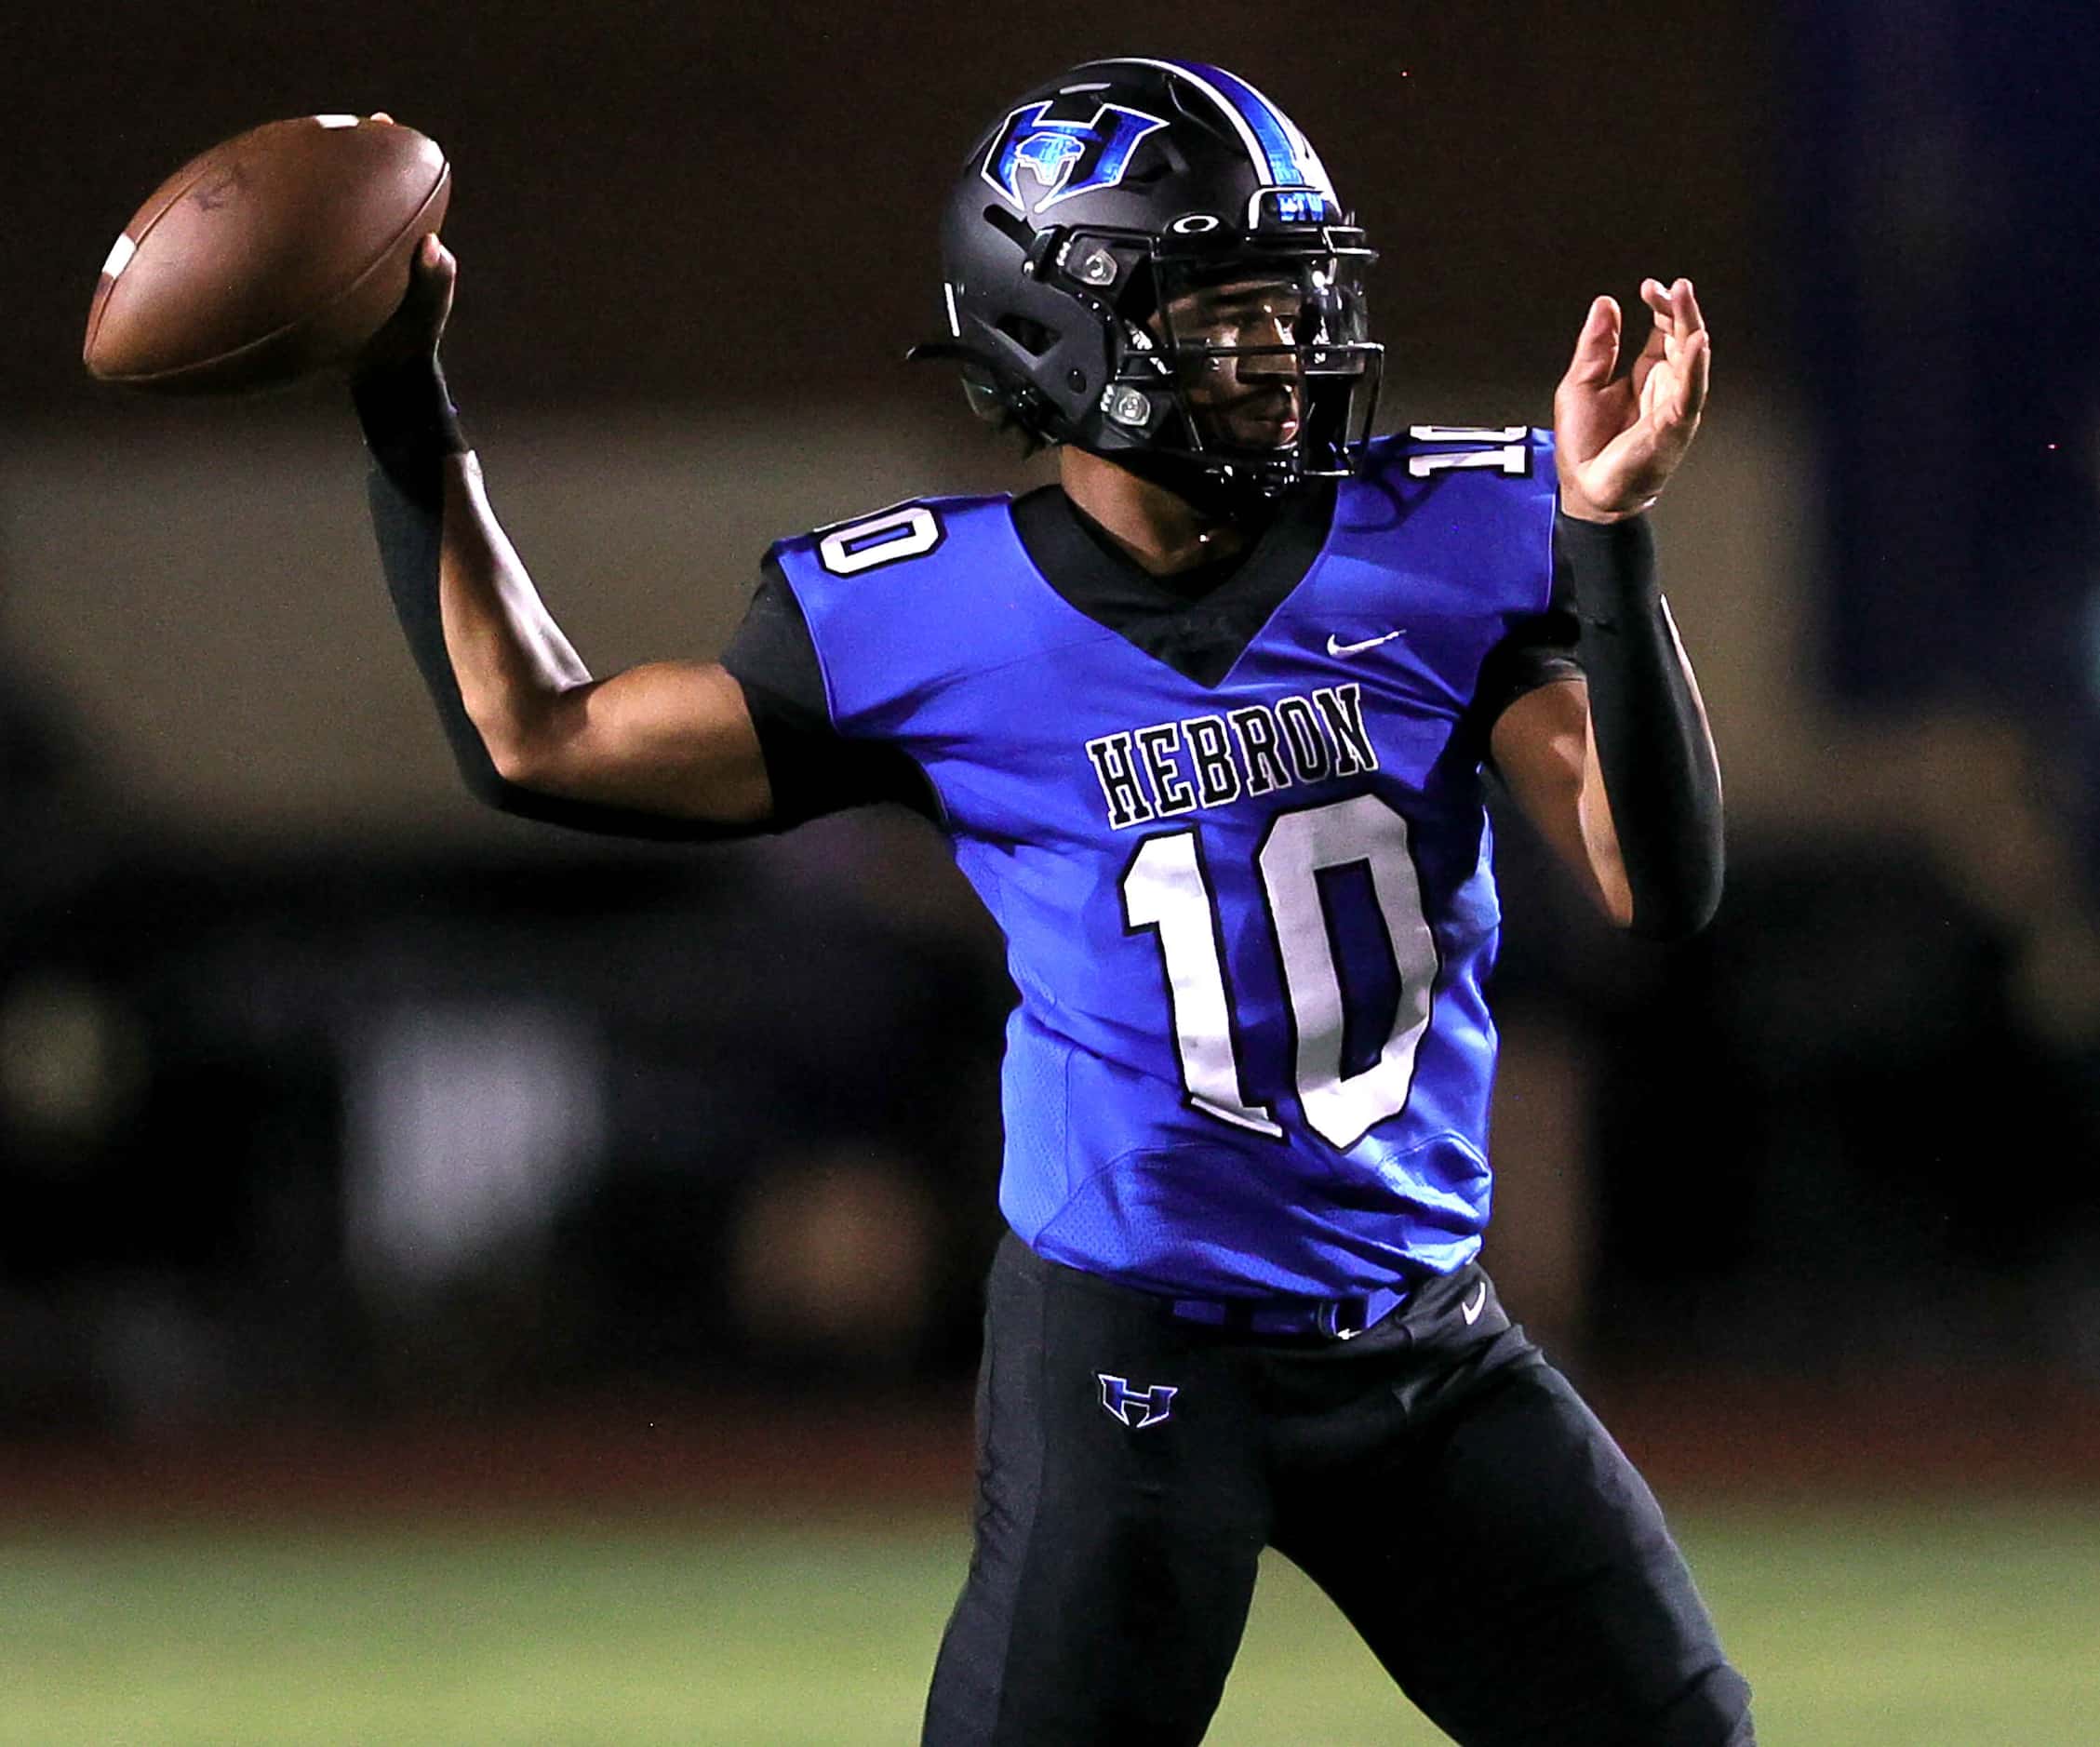 Hebron quarterback Patrick Crayton Jr attempts a pass against Eaton during the first half of...